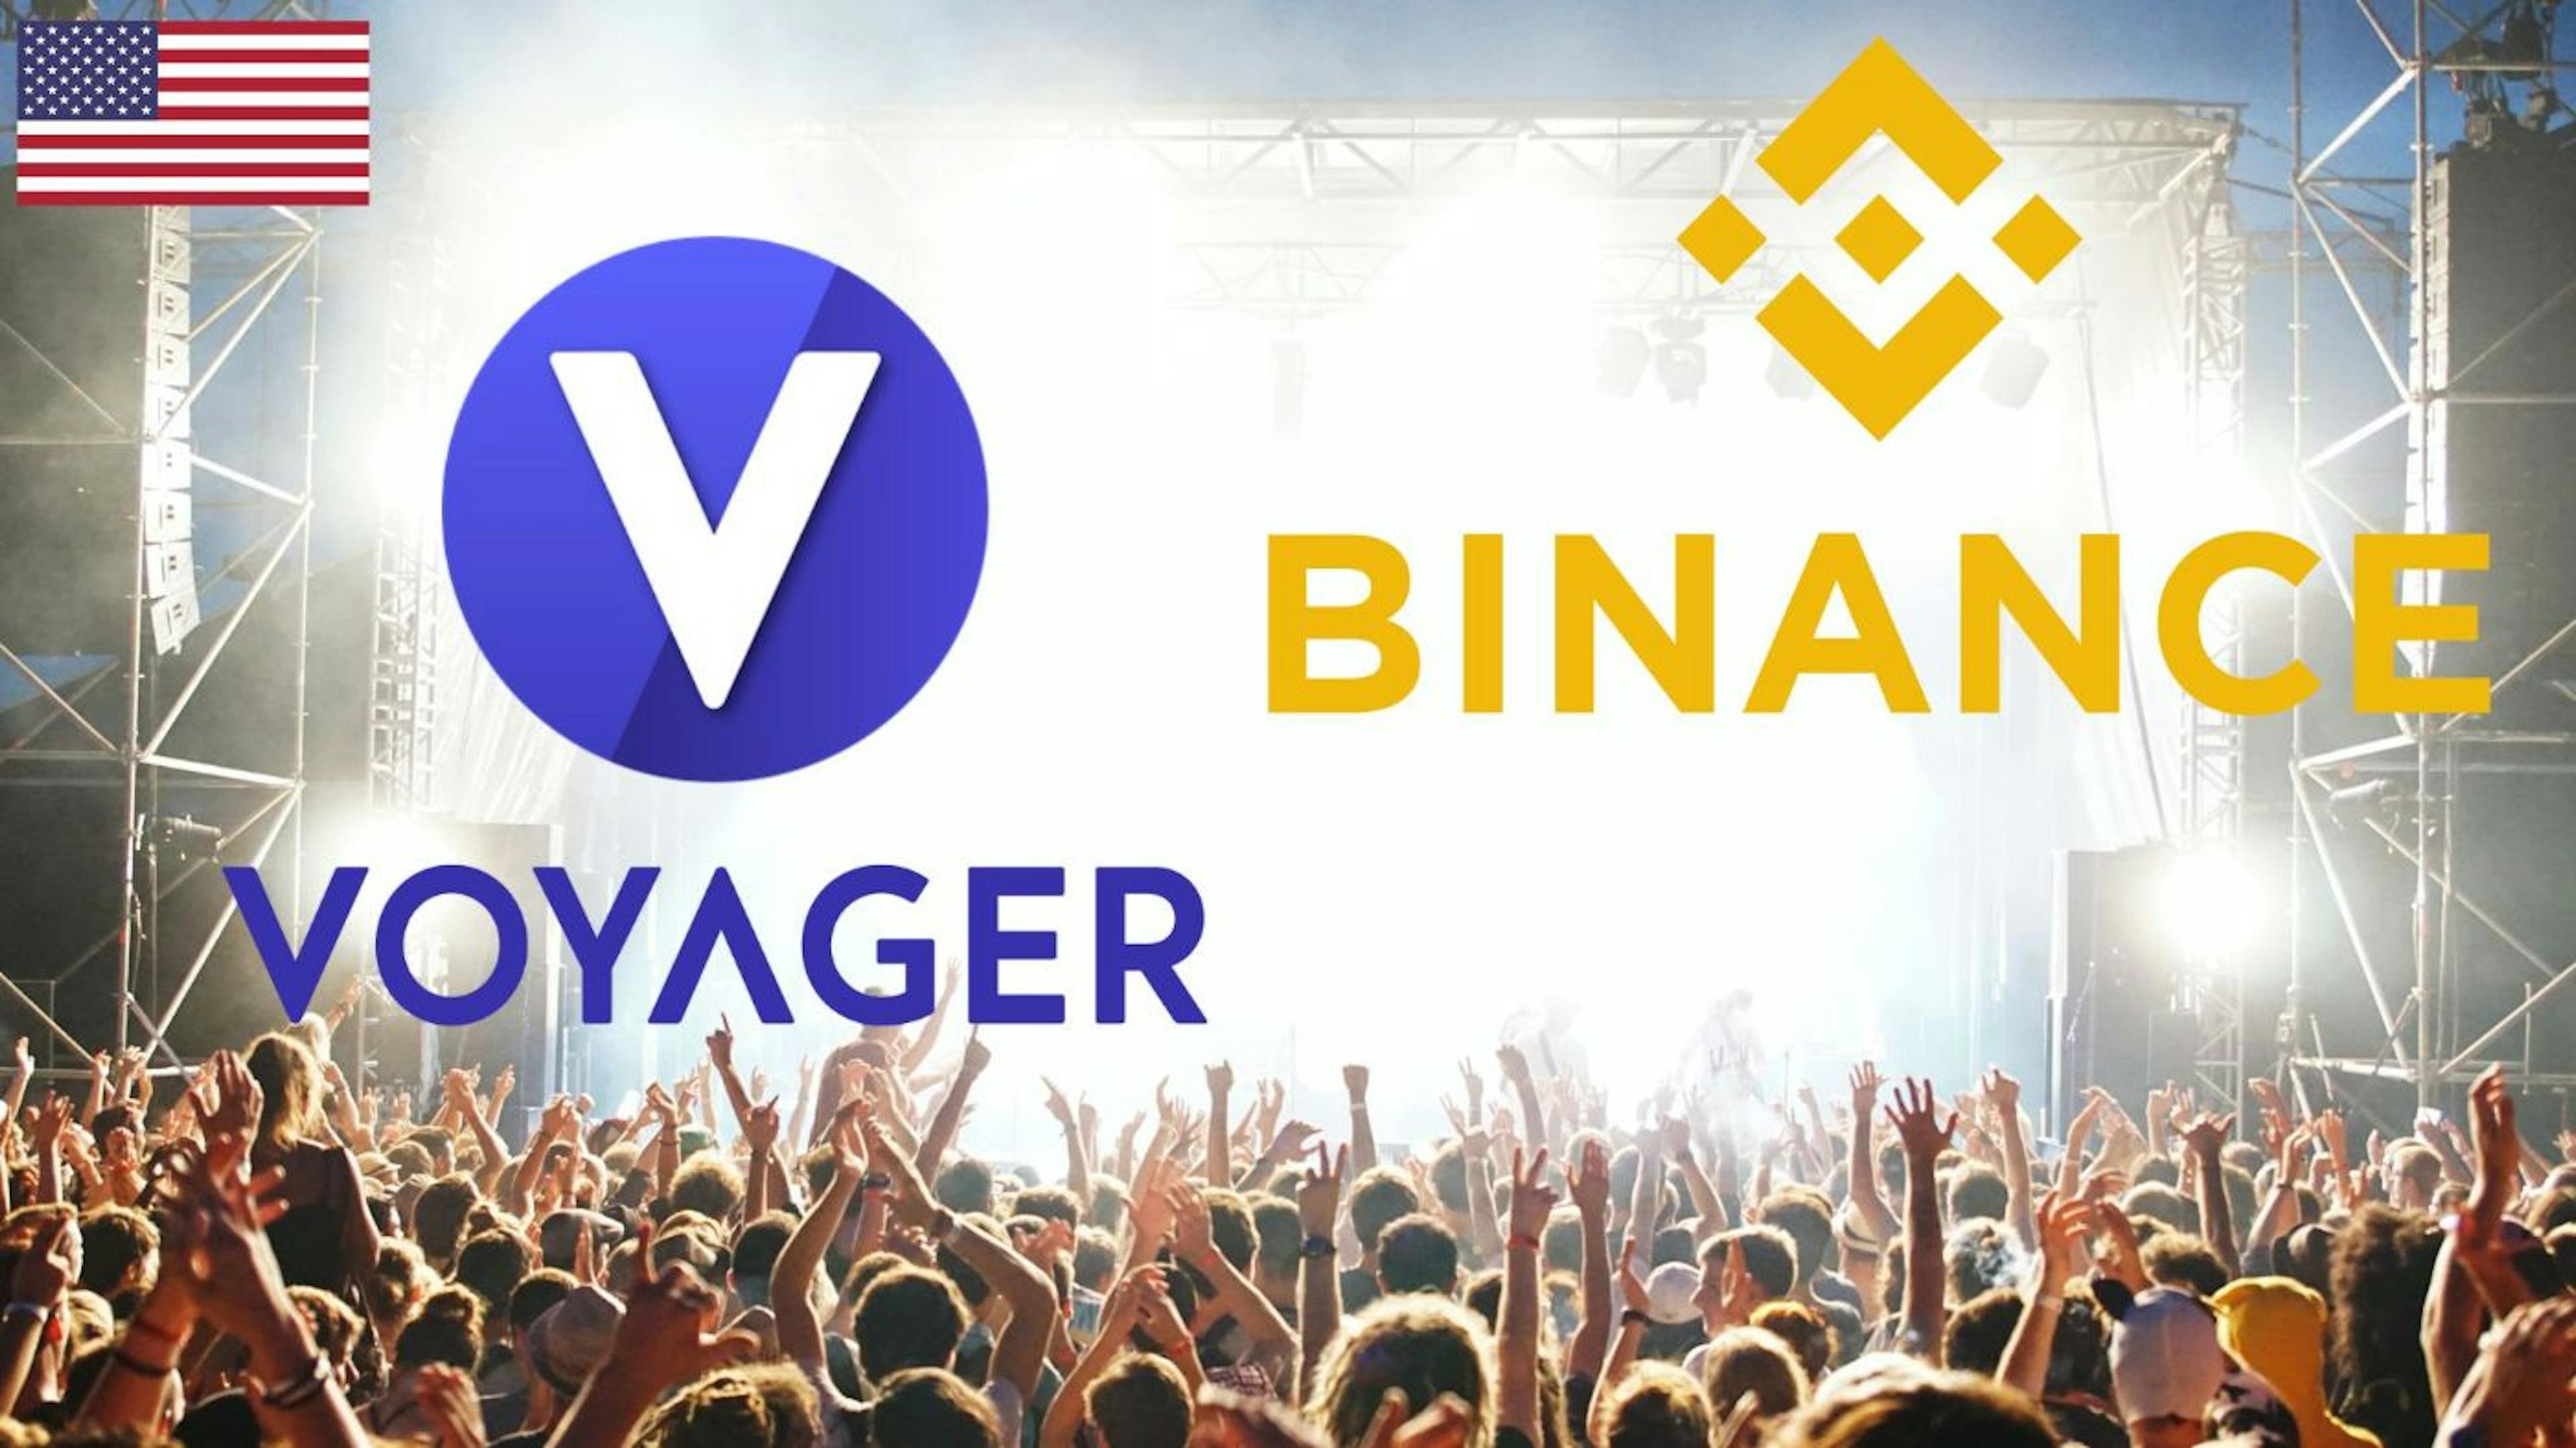 featured image - The U.S. Government Reaches Agreement with Voyager: $1.02 Billion Binance Deal to Move Forward